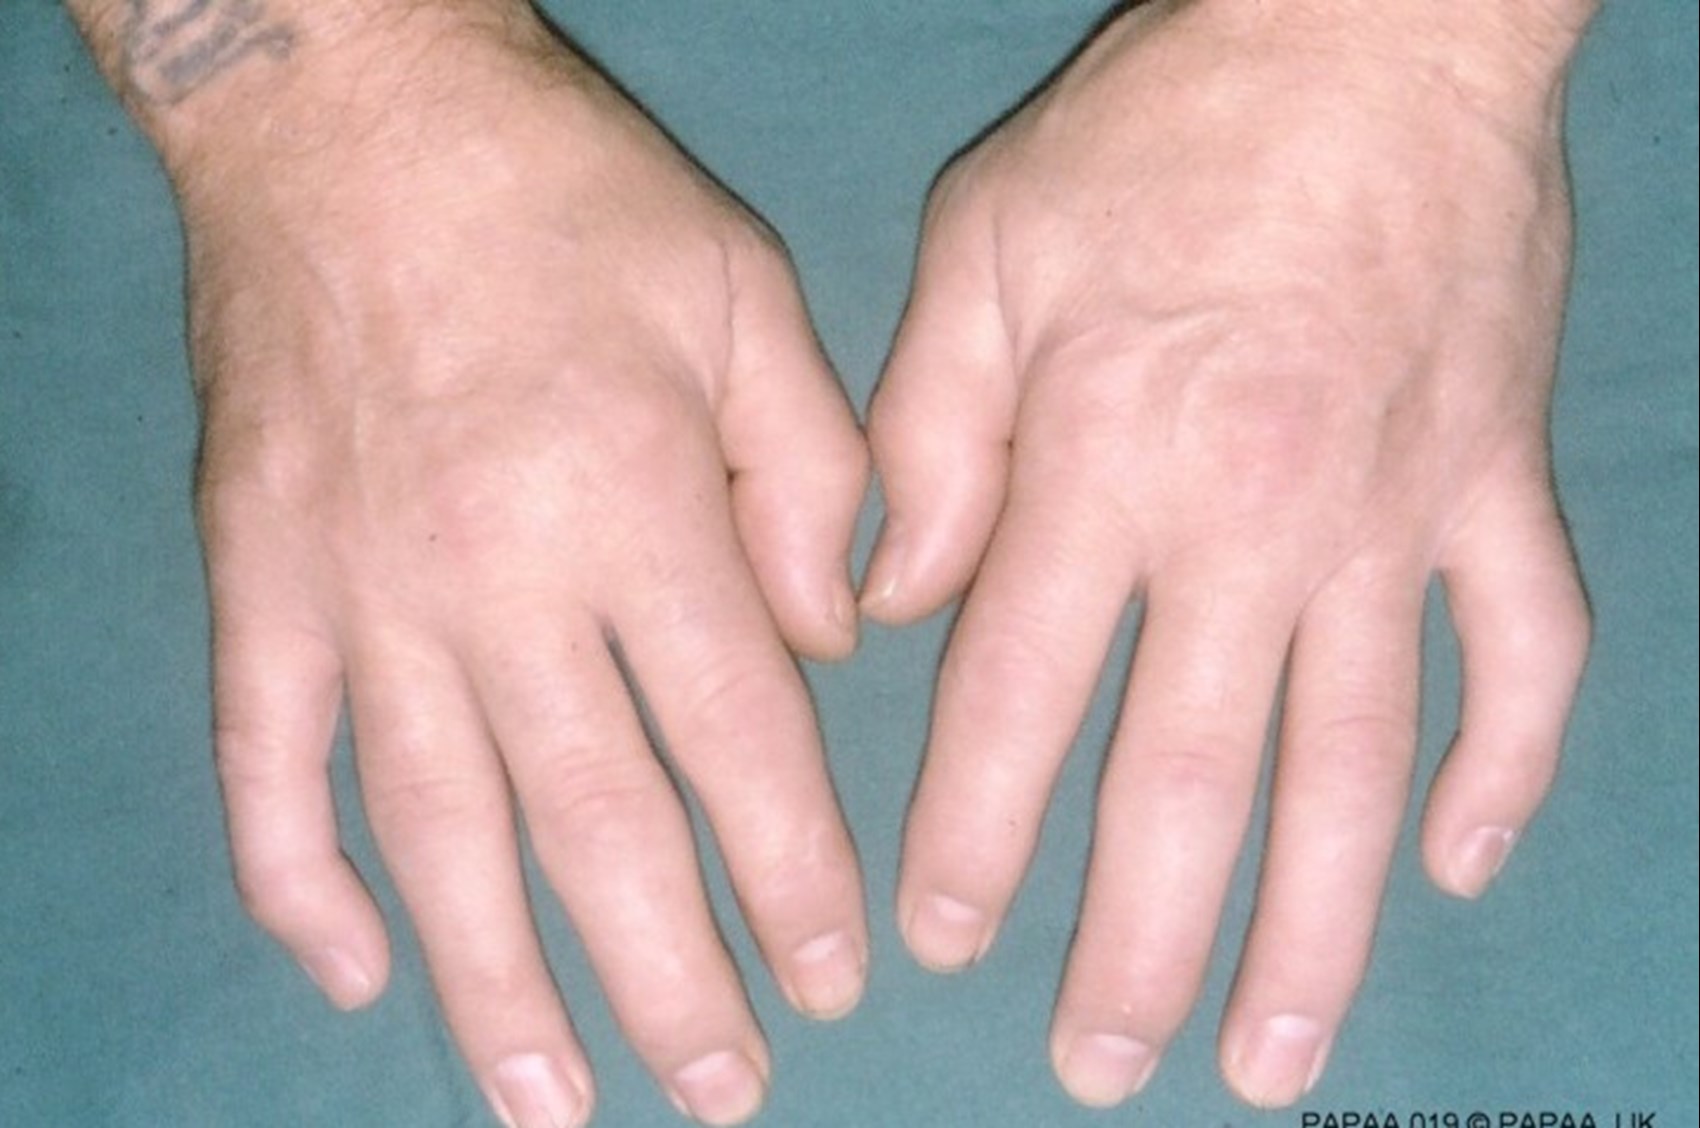 Let's Take A Look At The Strange Symptoms of Psoriatic Arthritis